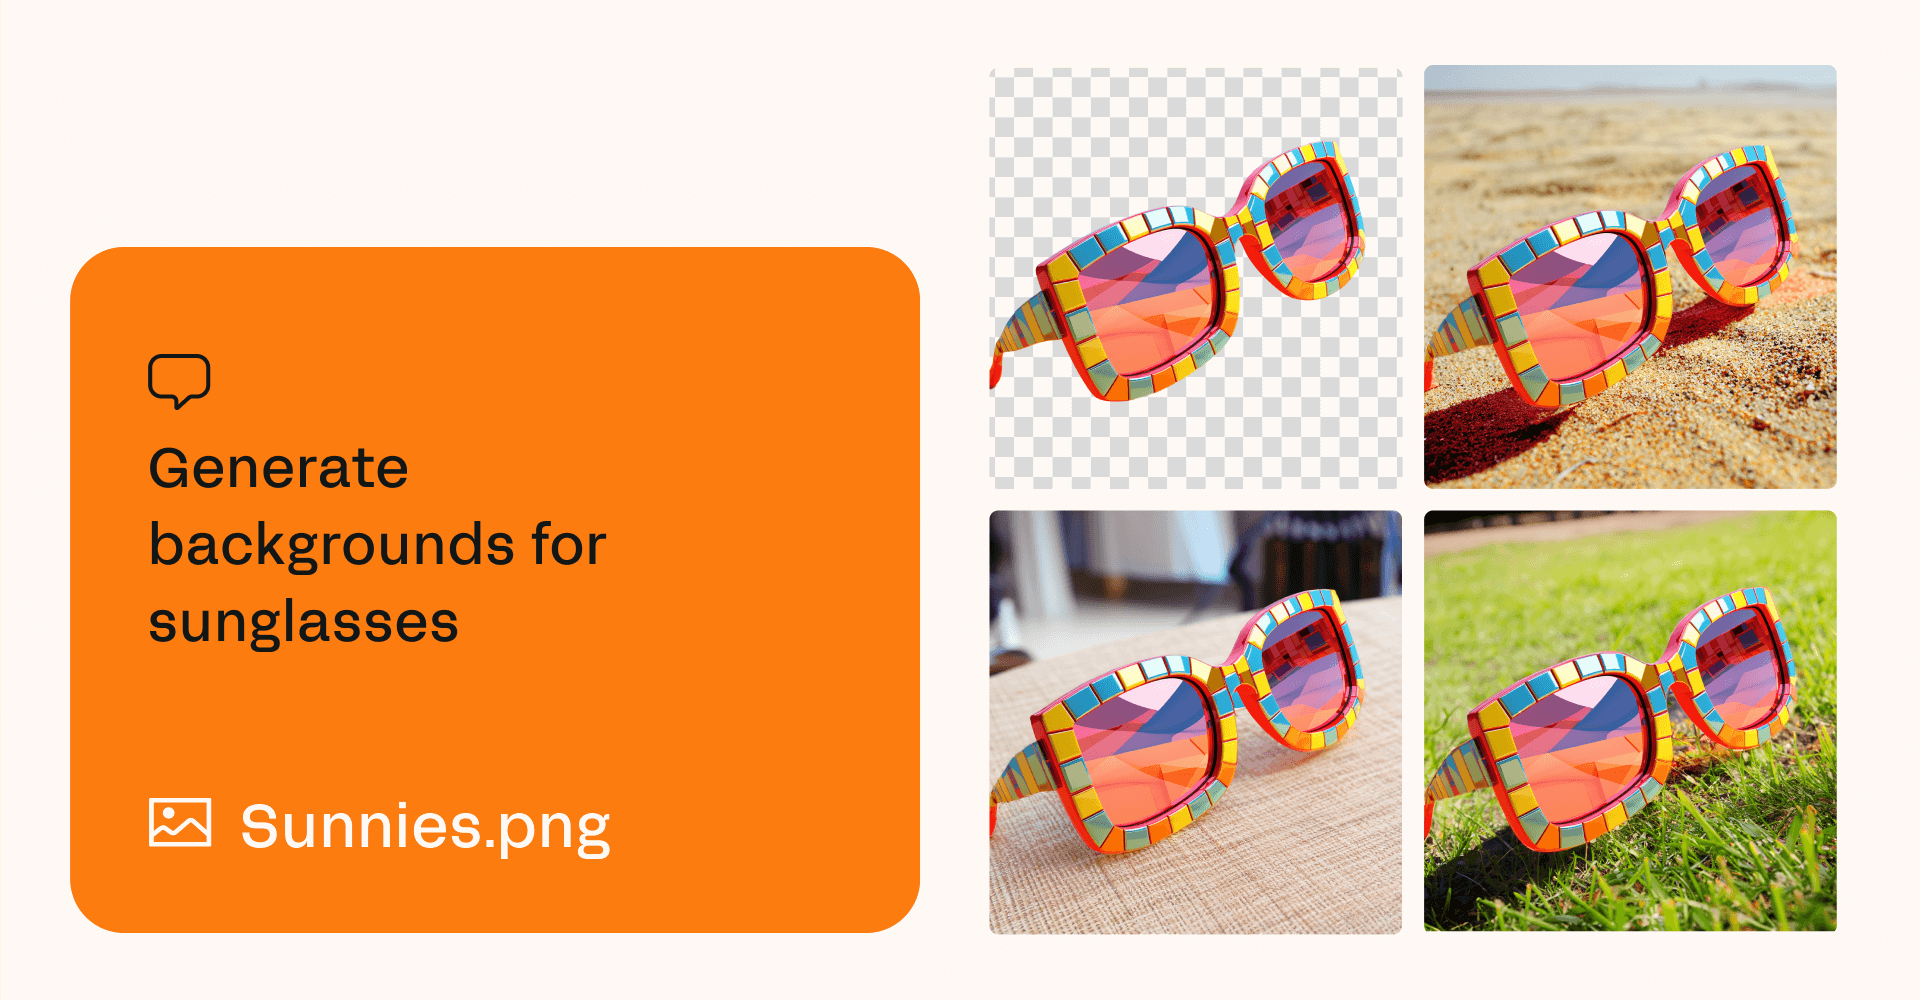 Software interface for generating backgrounds for a sunglasses image